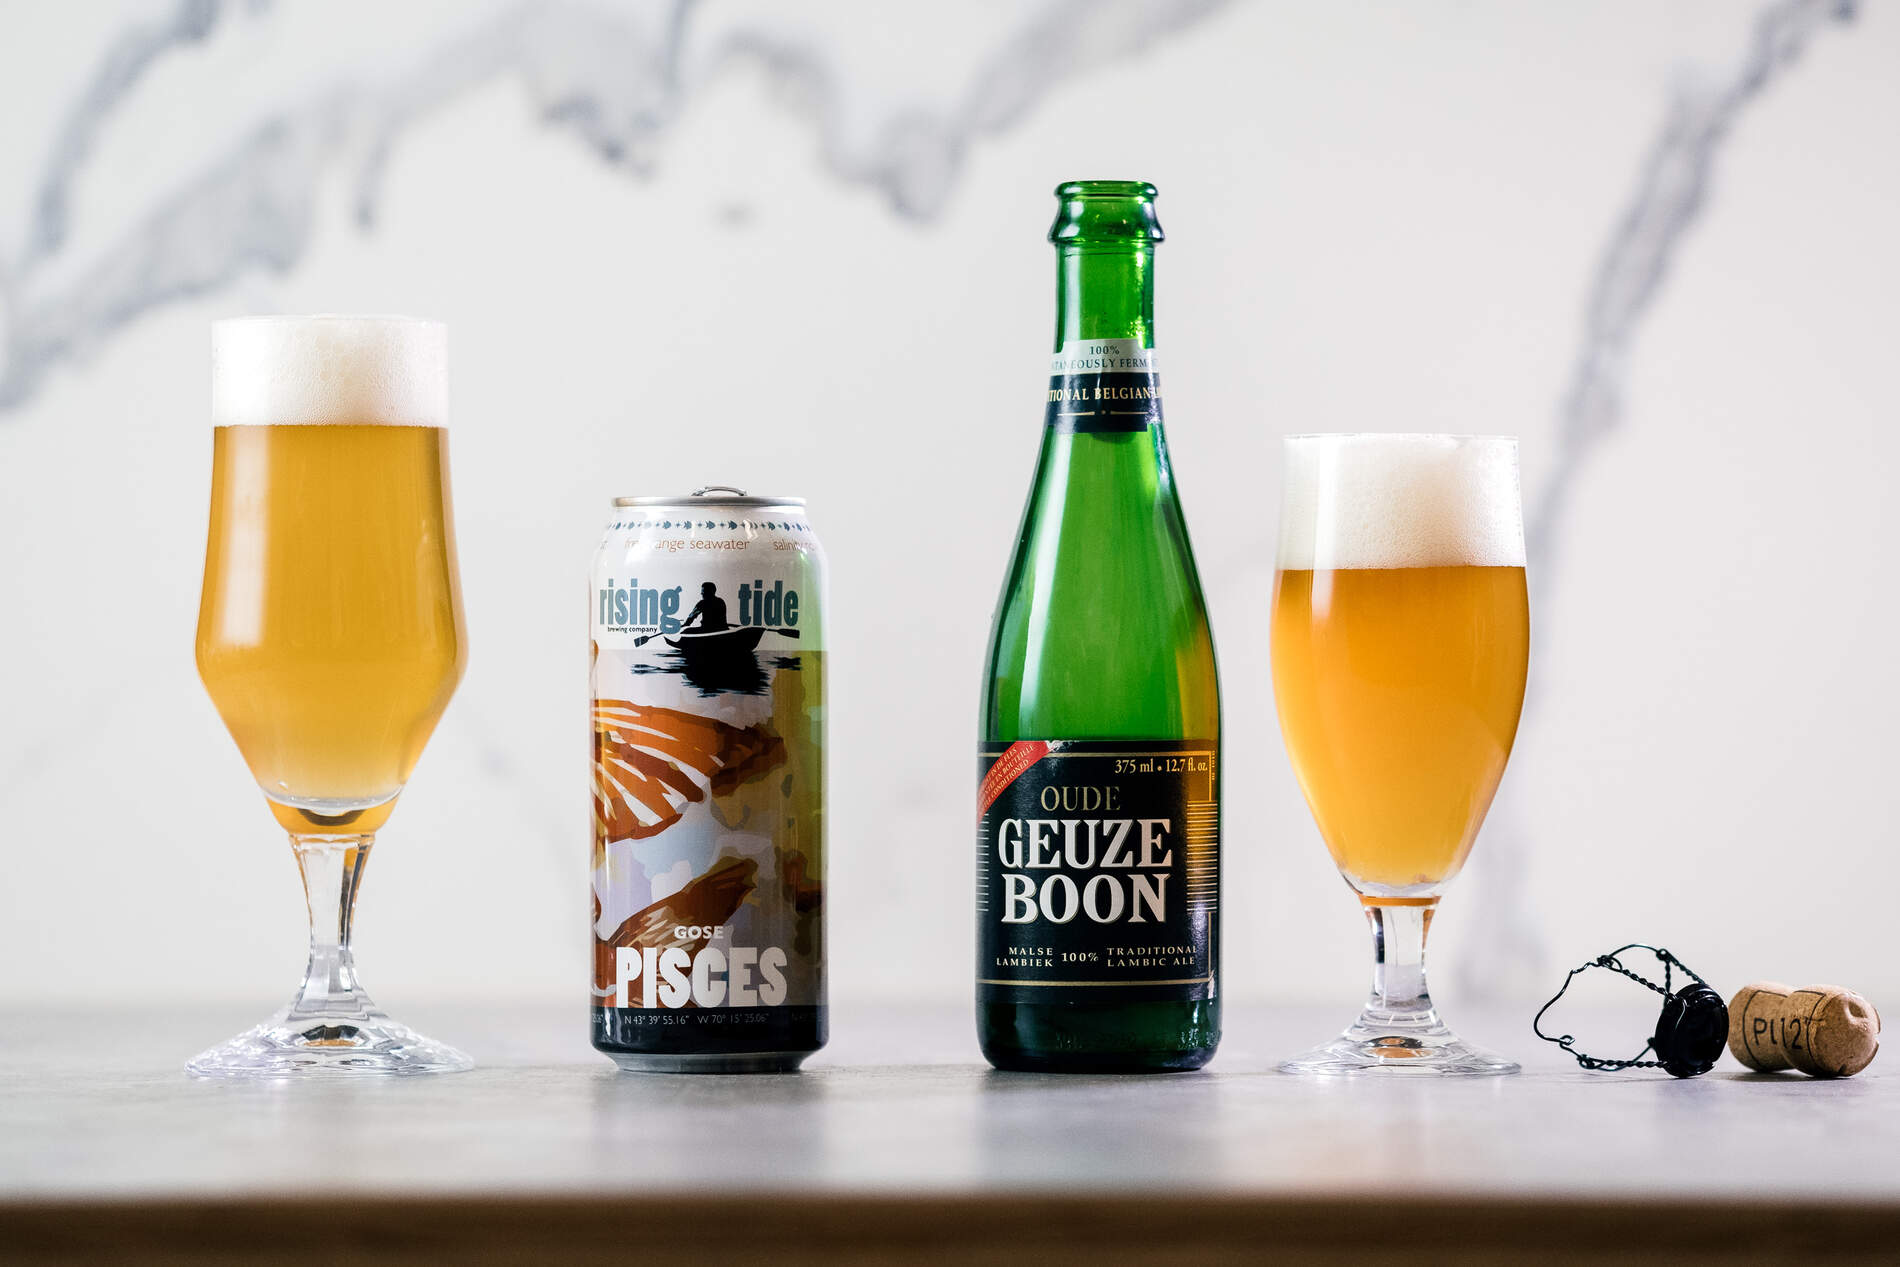 Gueuze and Gose – What’s the difference?